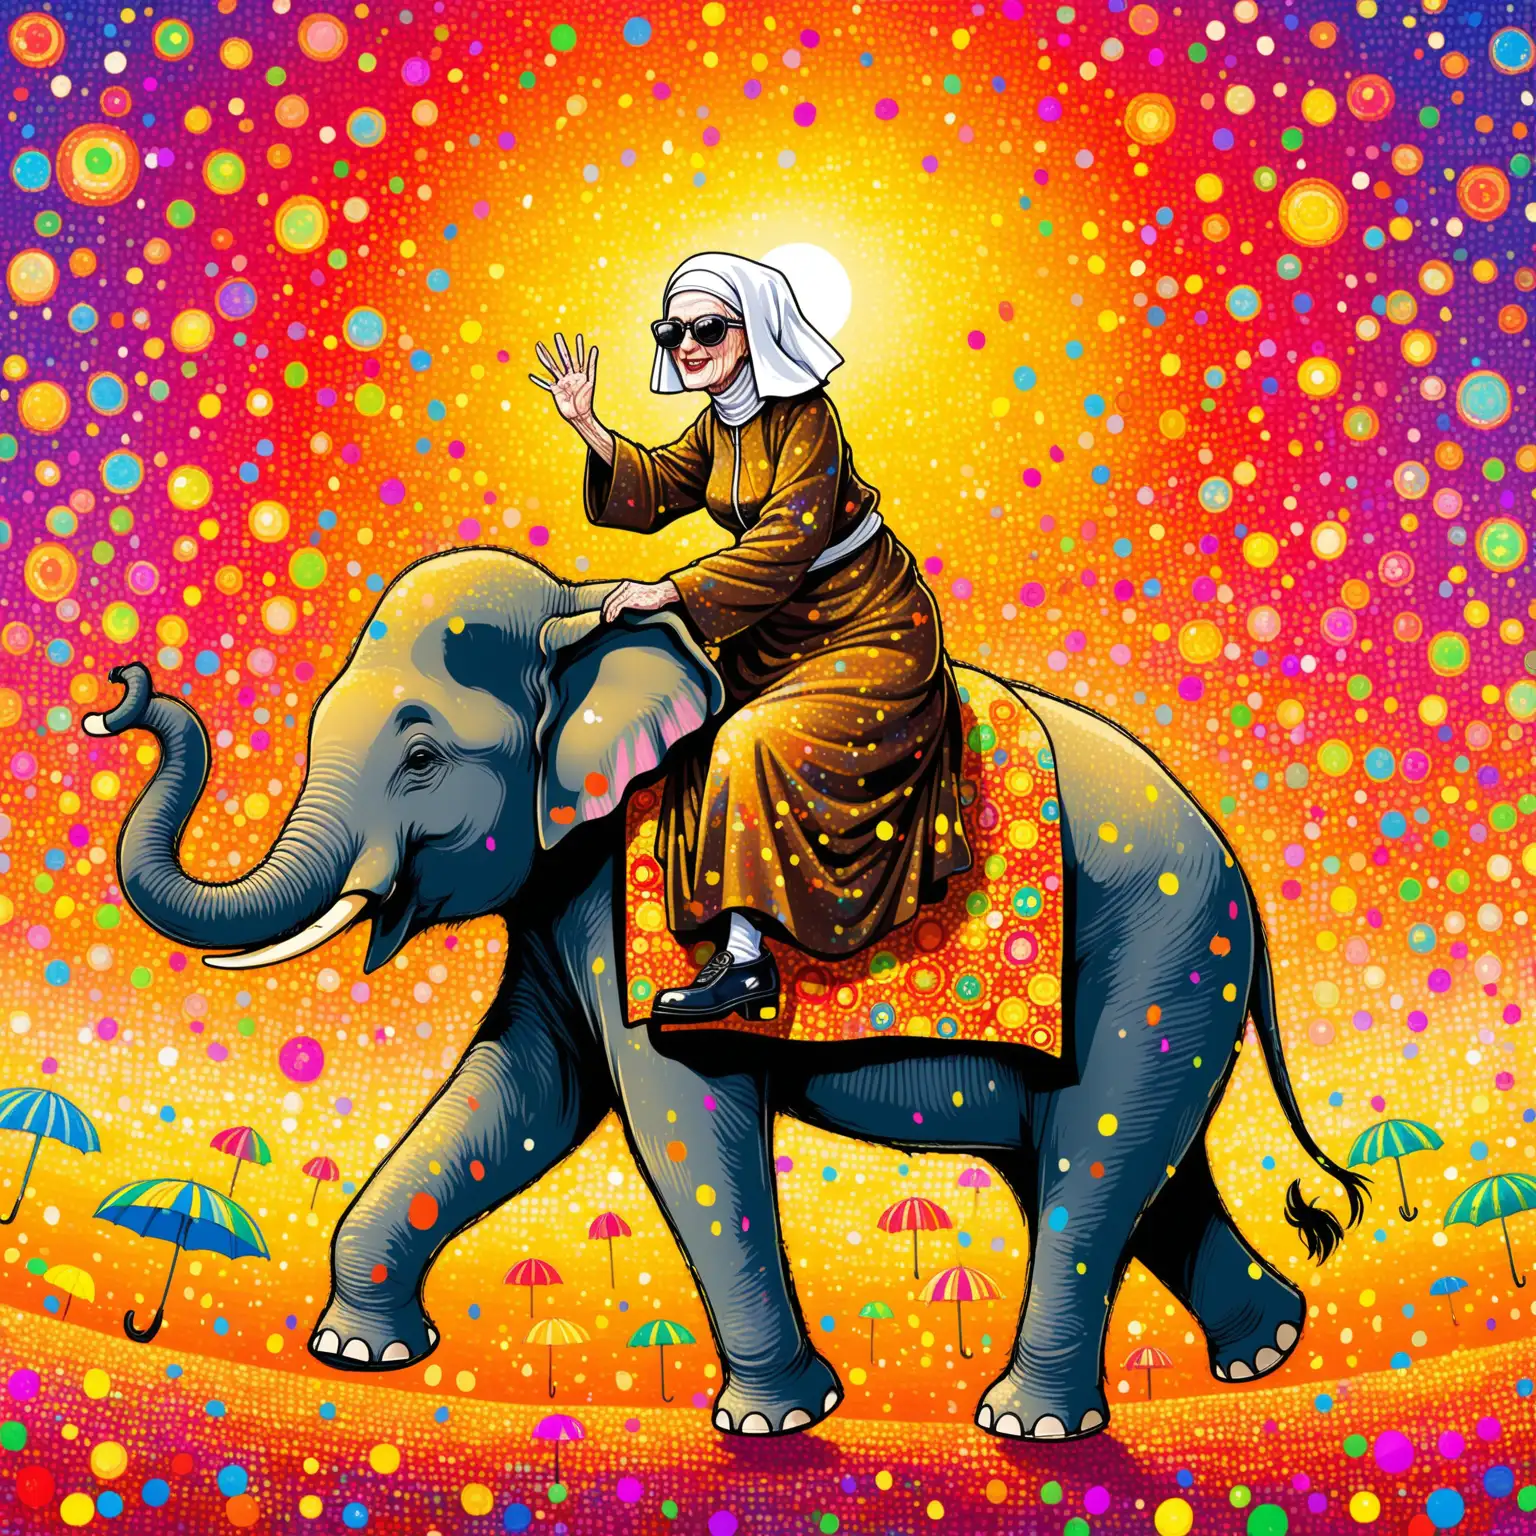 CRAZY  OLD NUN WEARING SUNGLASSES RIDING HER INDIAN  ELEPHANT IN STYLE OF KUSTAZ KLIMT AND JACKSON POLLOCK PSYCHEDELIC, CRAZY BACKGROUND GOLD MESSY,    AT  THE FAIRGROUND, LOTS OF FAIRGROUND ! RIDING A BIG ELEPHANT OFF INTO INTO THE SUNSET WE SEE HER AND THE ELEPHANTS BACKFROM BEHIND WAVING GOODBYE FLOWERS RAINING FROM THE SKY
